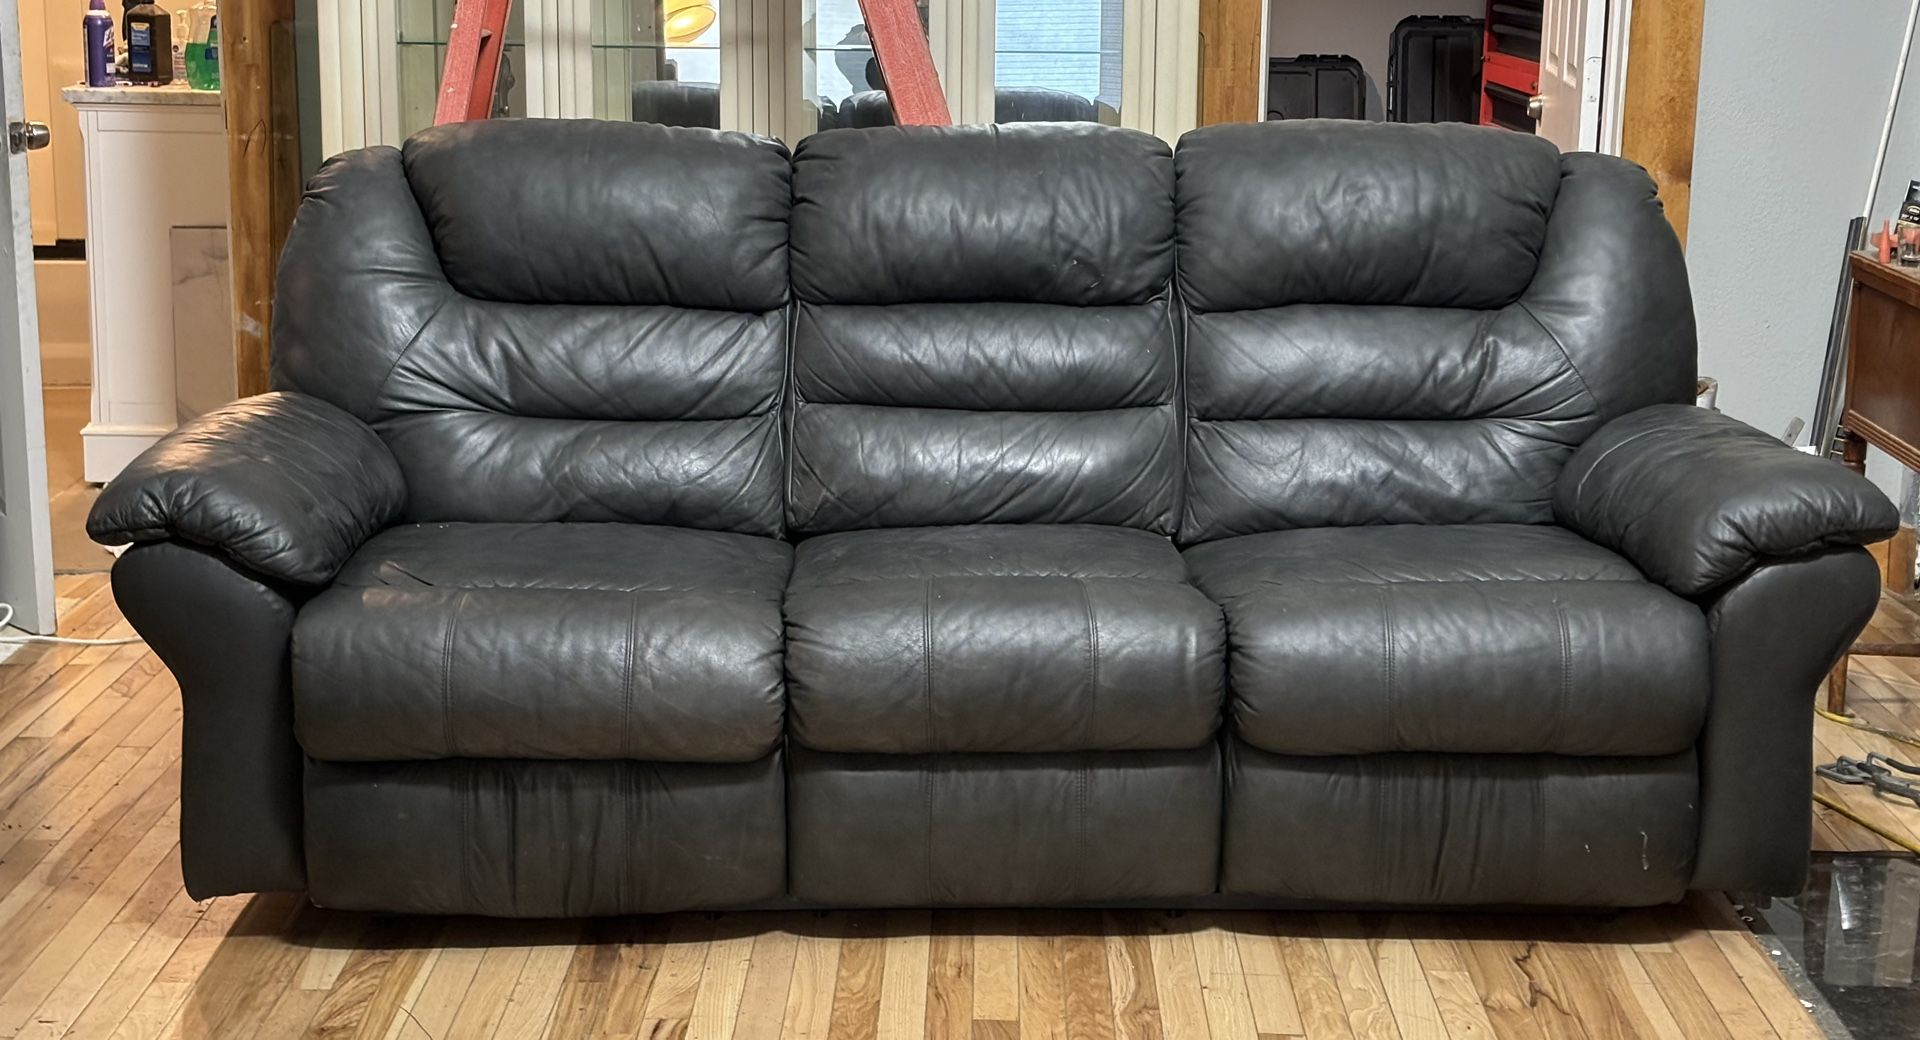 Pair Of 100% Genuine Leather Dual Recliner Couches